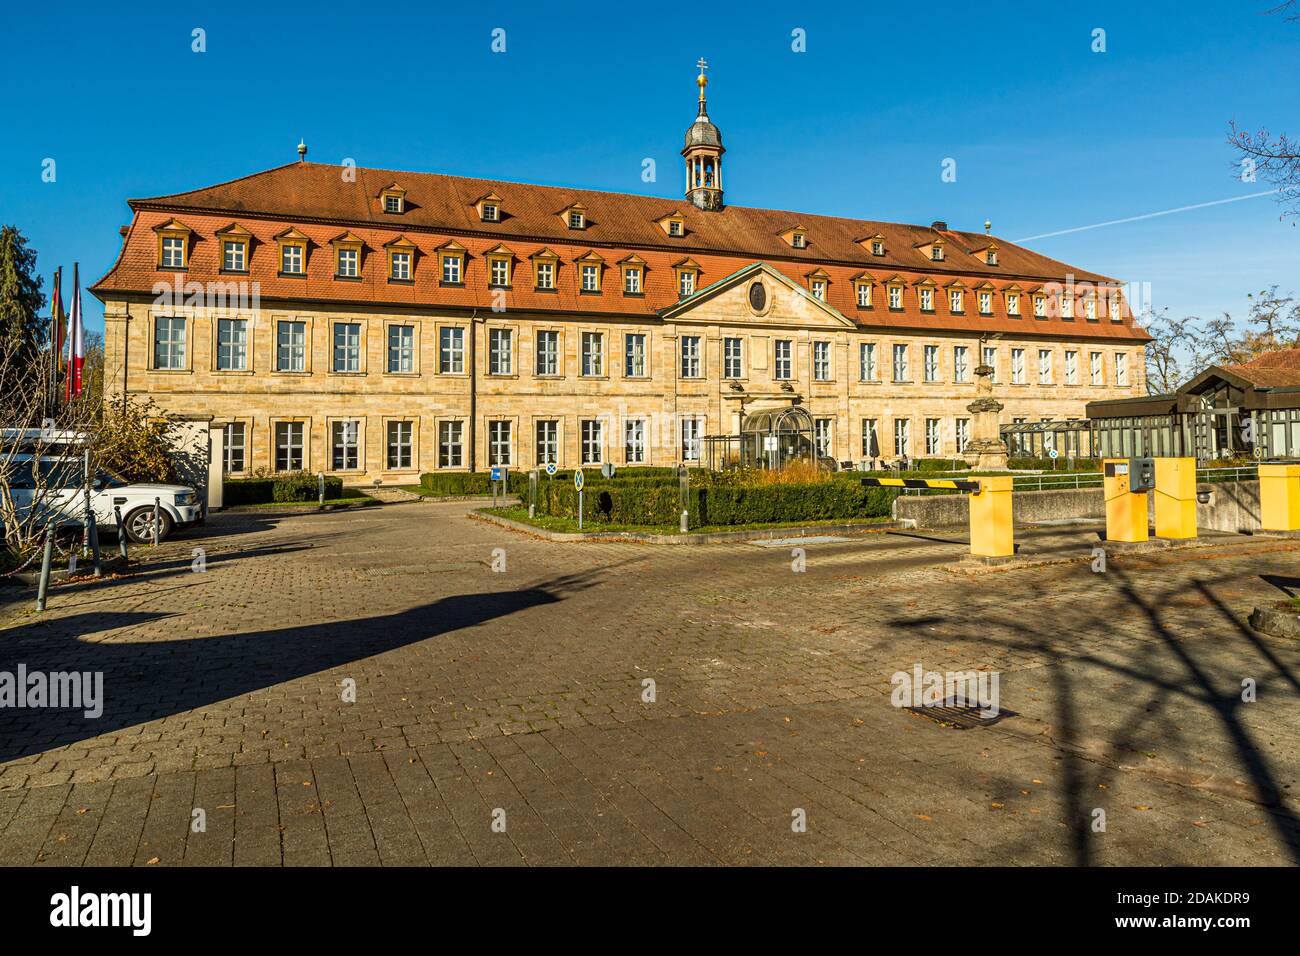 Today's Hotel Residenzschloss in Bamberg was inaugurated in 1798 as a university clinic according to plans by the Bamberg court architect Johannes Lorenz Fink. Bamberg, Germany Stock Photo